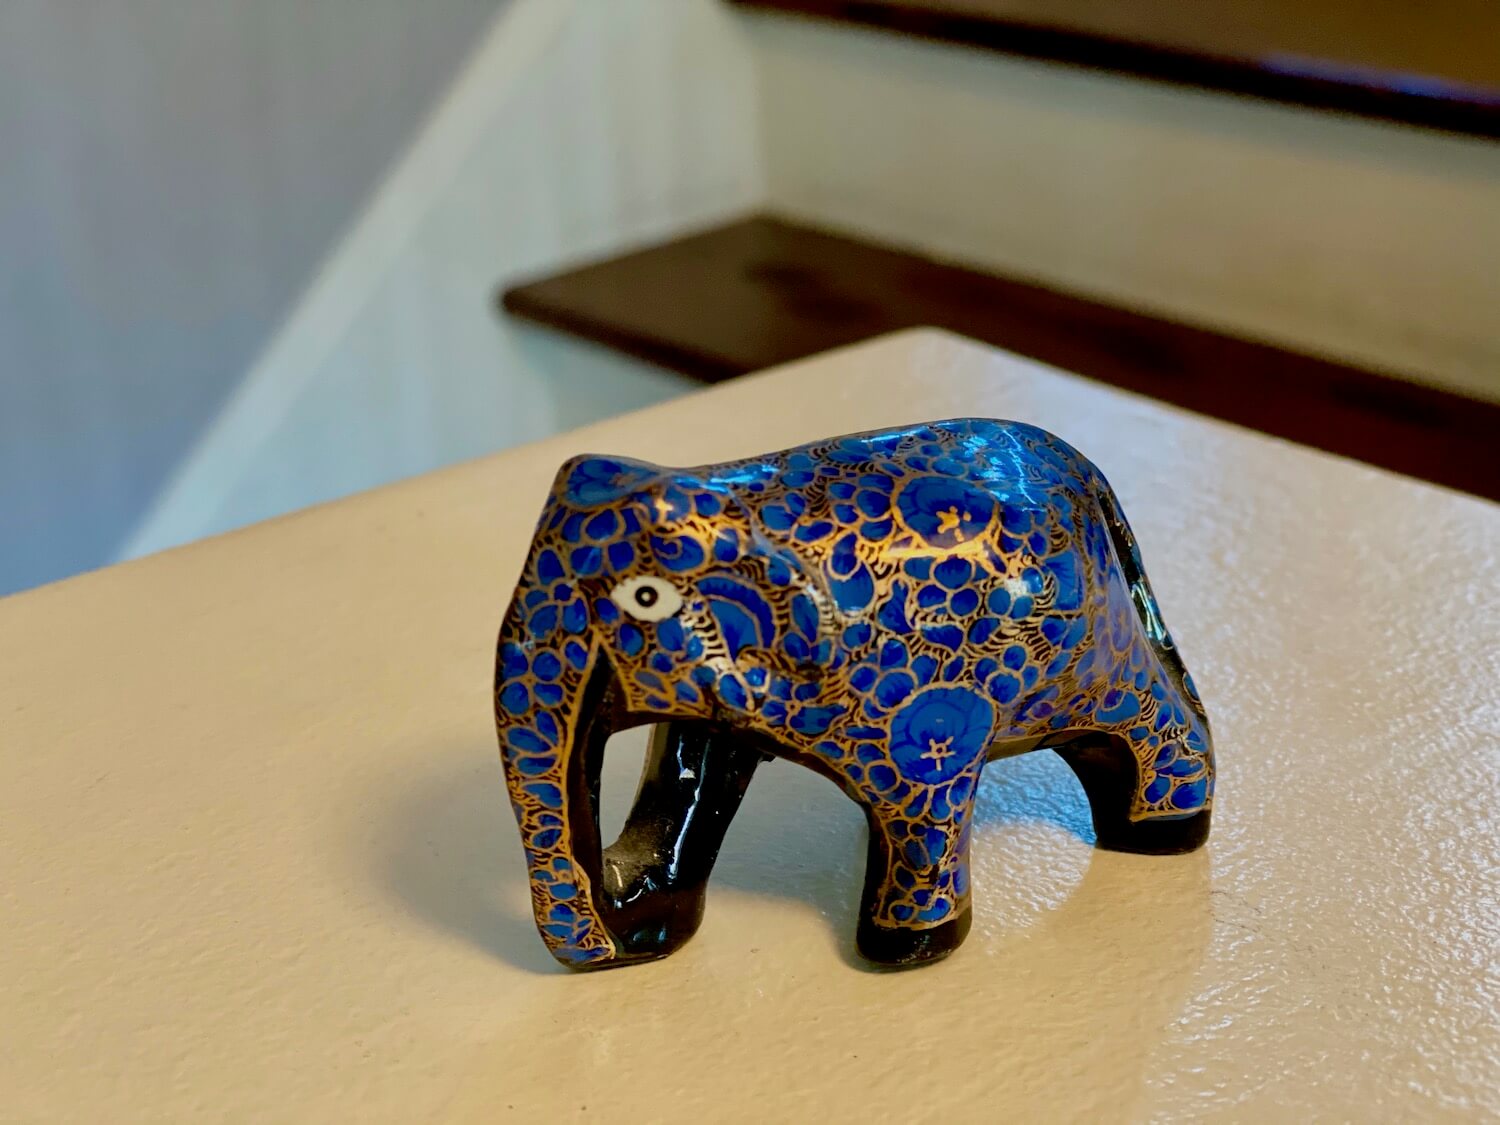 This is a brightly painted miniature elephant from Kashmir region of India painted with bright gold lines outlining cobalt blue shapes. The figures underbelly is black and there is a white eye looking at the camera.  The elephant is one of my favorites because it's a souvenir with soul. 